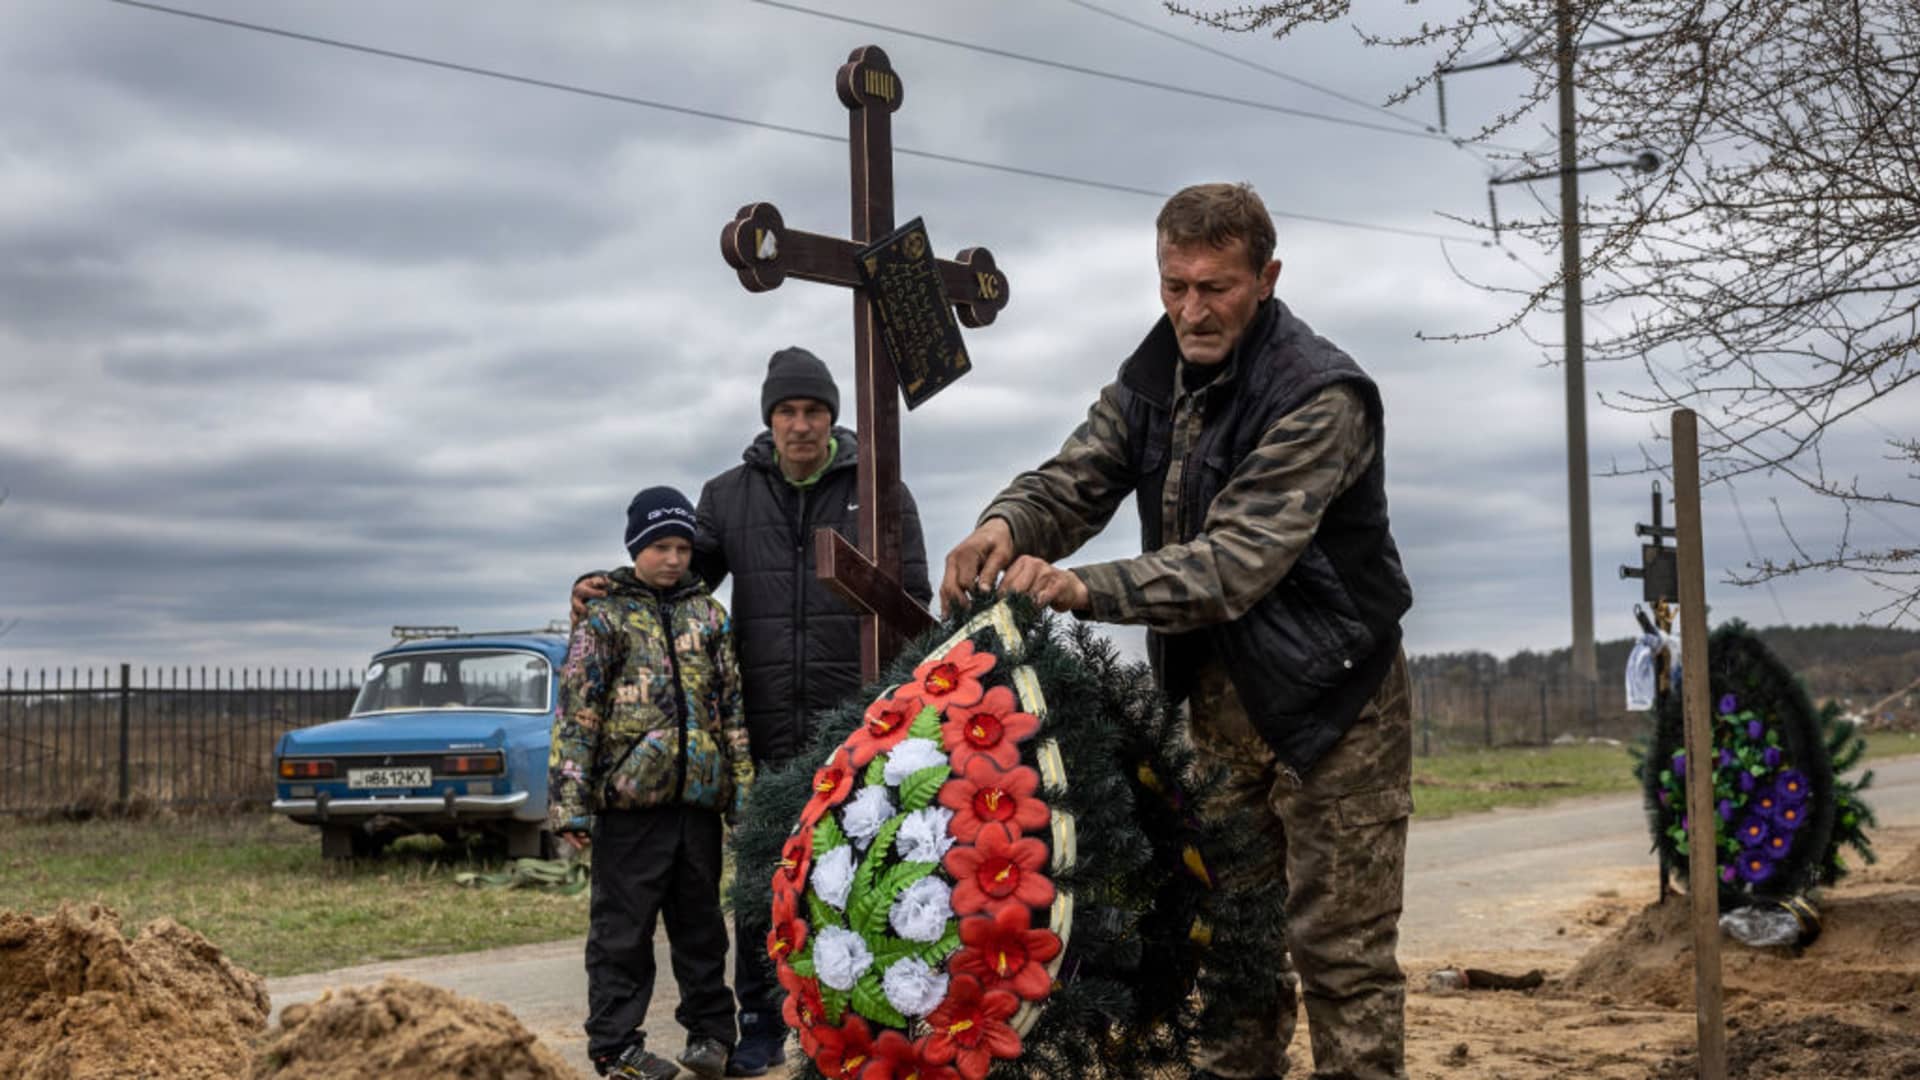 A grave digger arranges flowers atop the grave of a woman as her husband and son watch on April 20, 2022 in Bucha, Ukraine. Ukraine's prosecutor general Iryna Venediktova has identified 10 Russian soldiers she previously accused of atrocities in Bucha, Ukraine, The Associated Press reported.